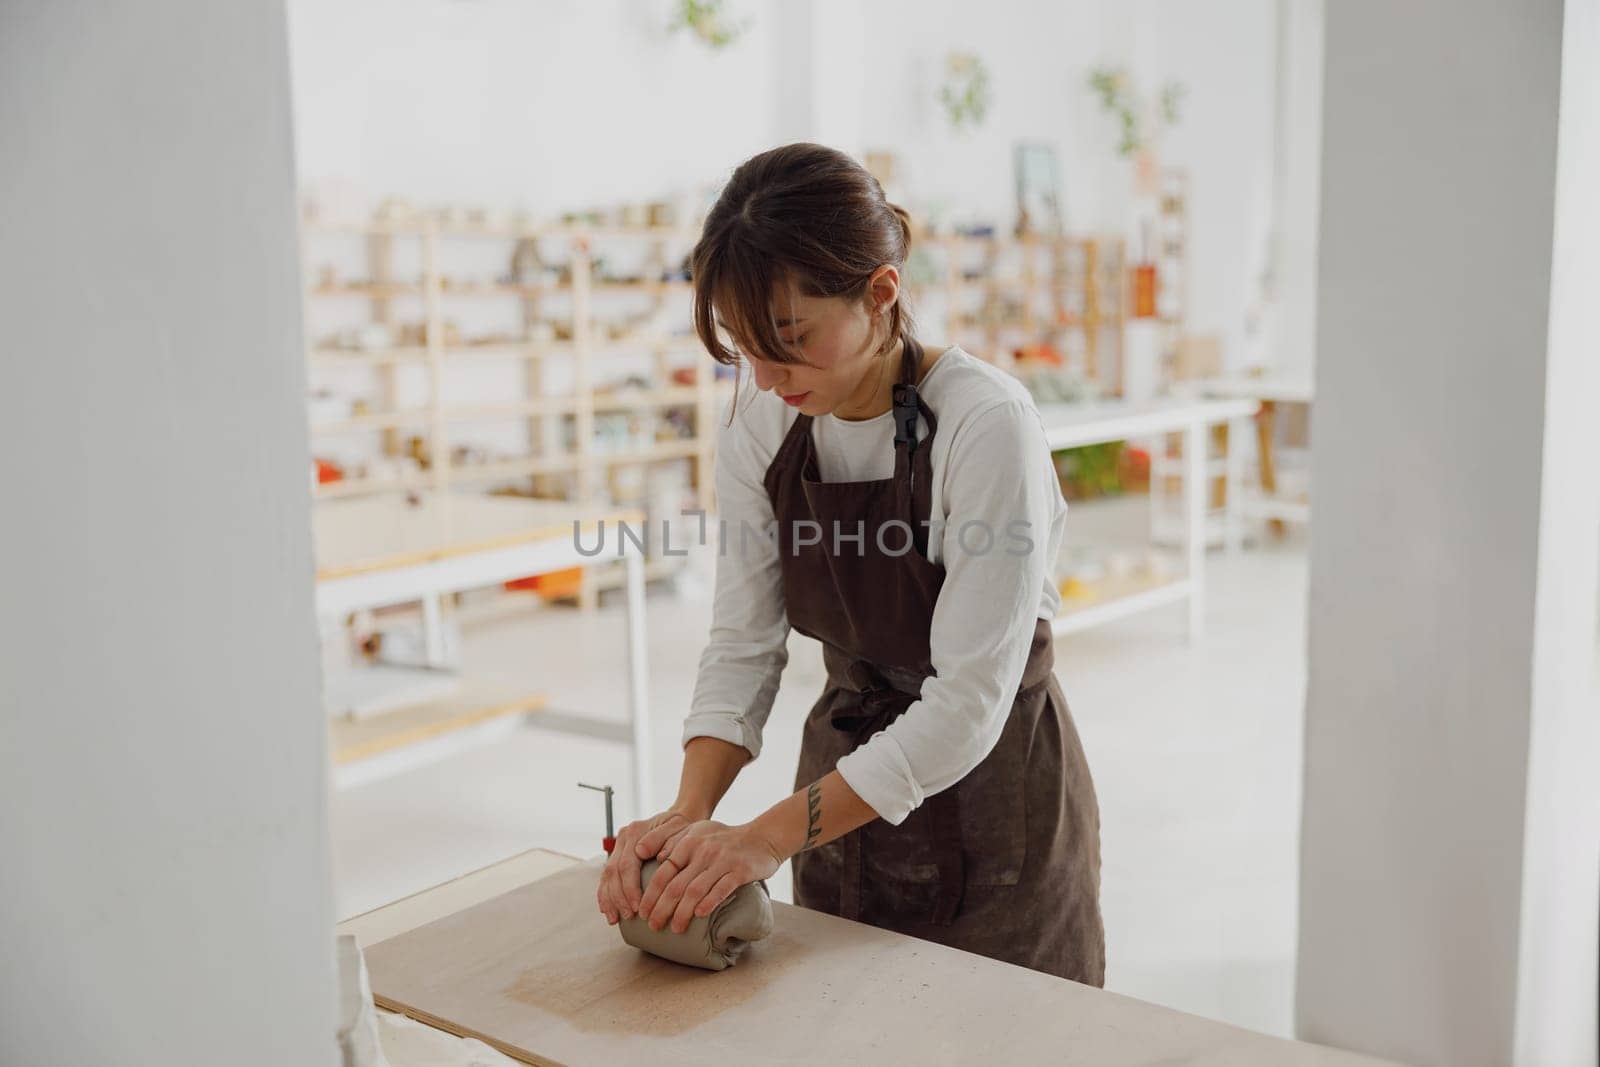 Professional female potter in apron kneads piece of clay with her hands on table in studio